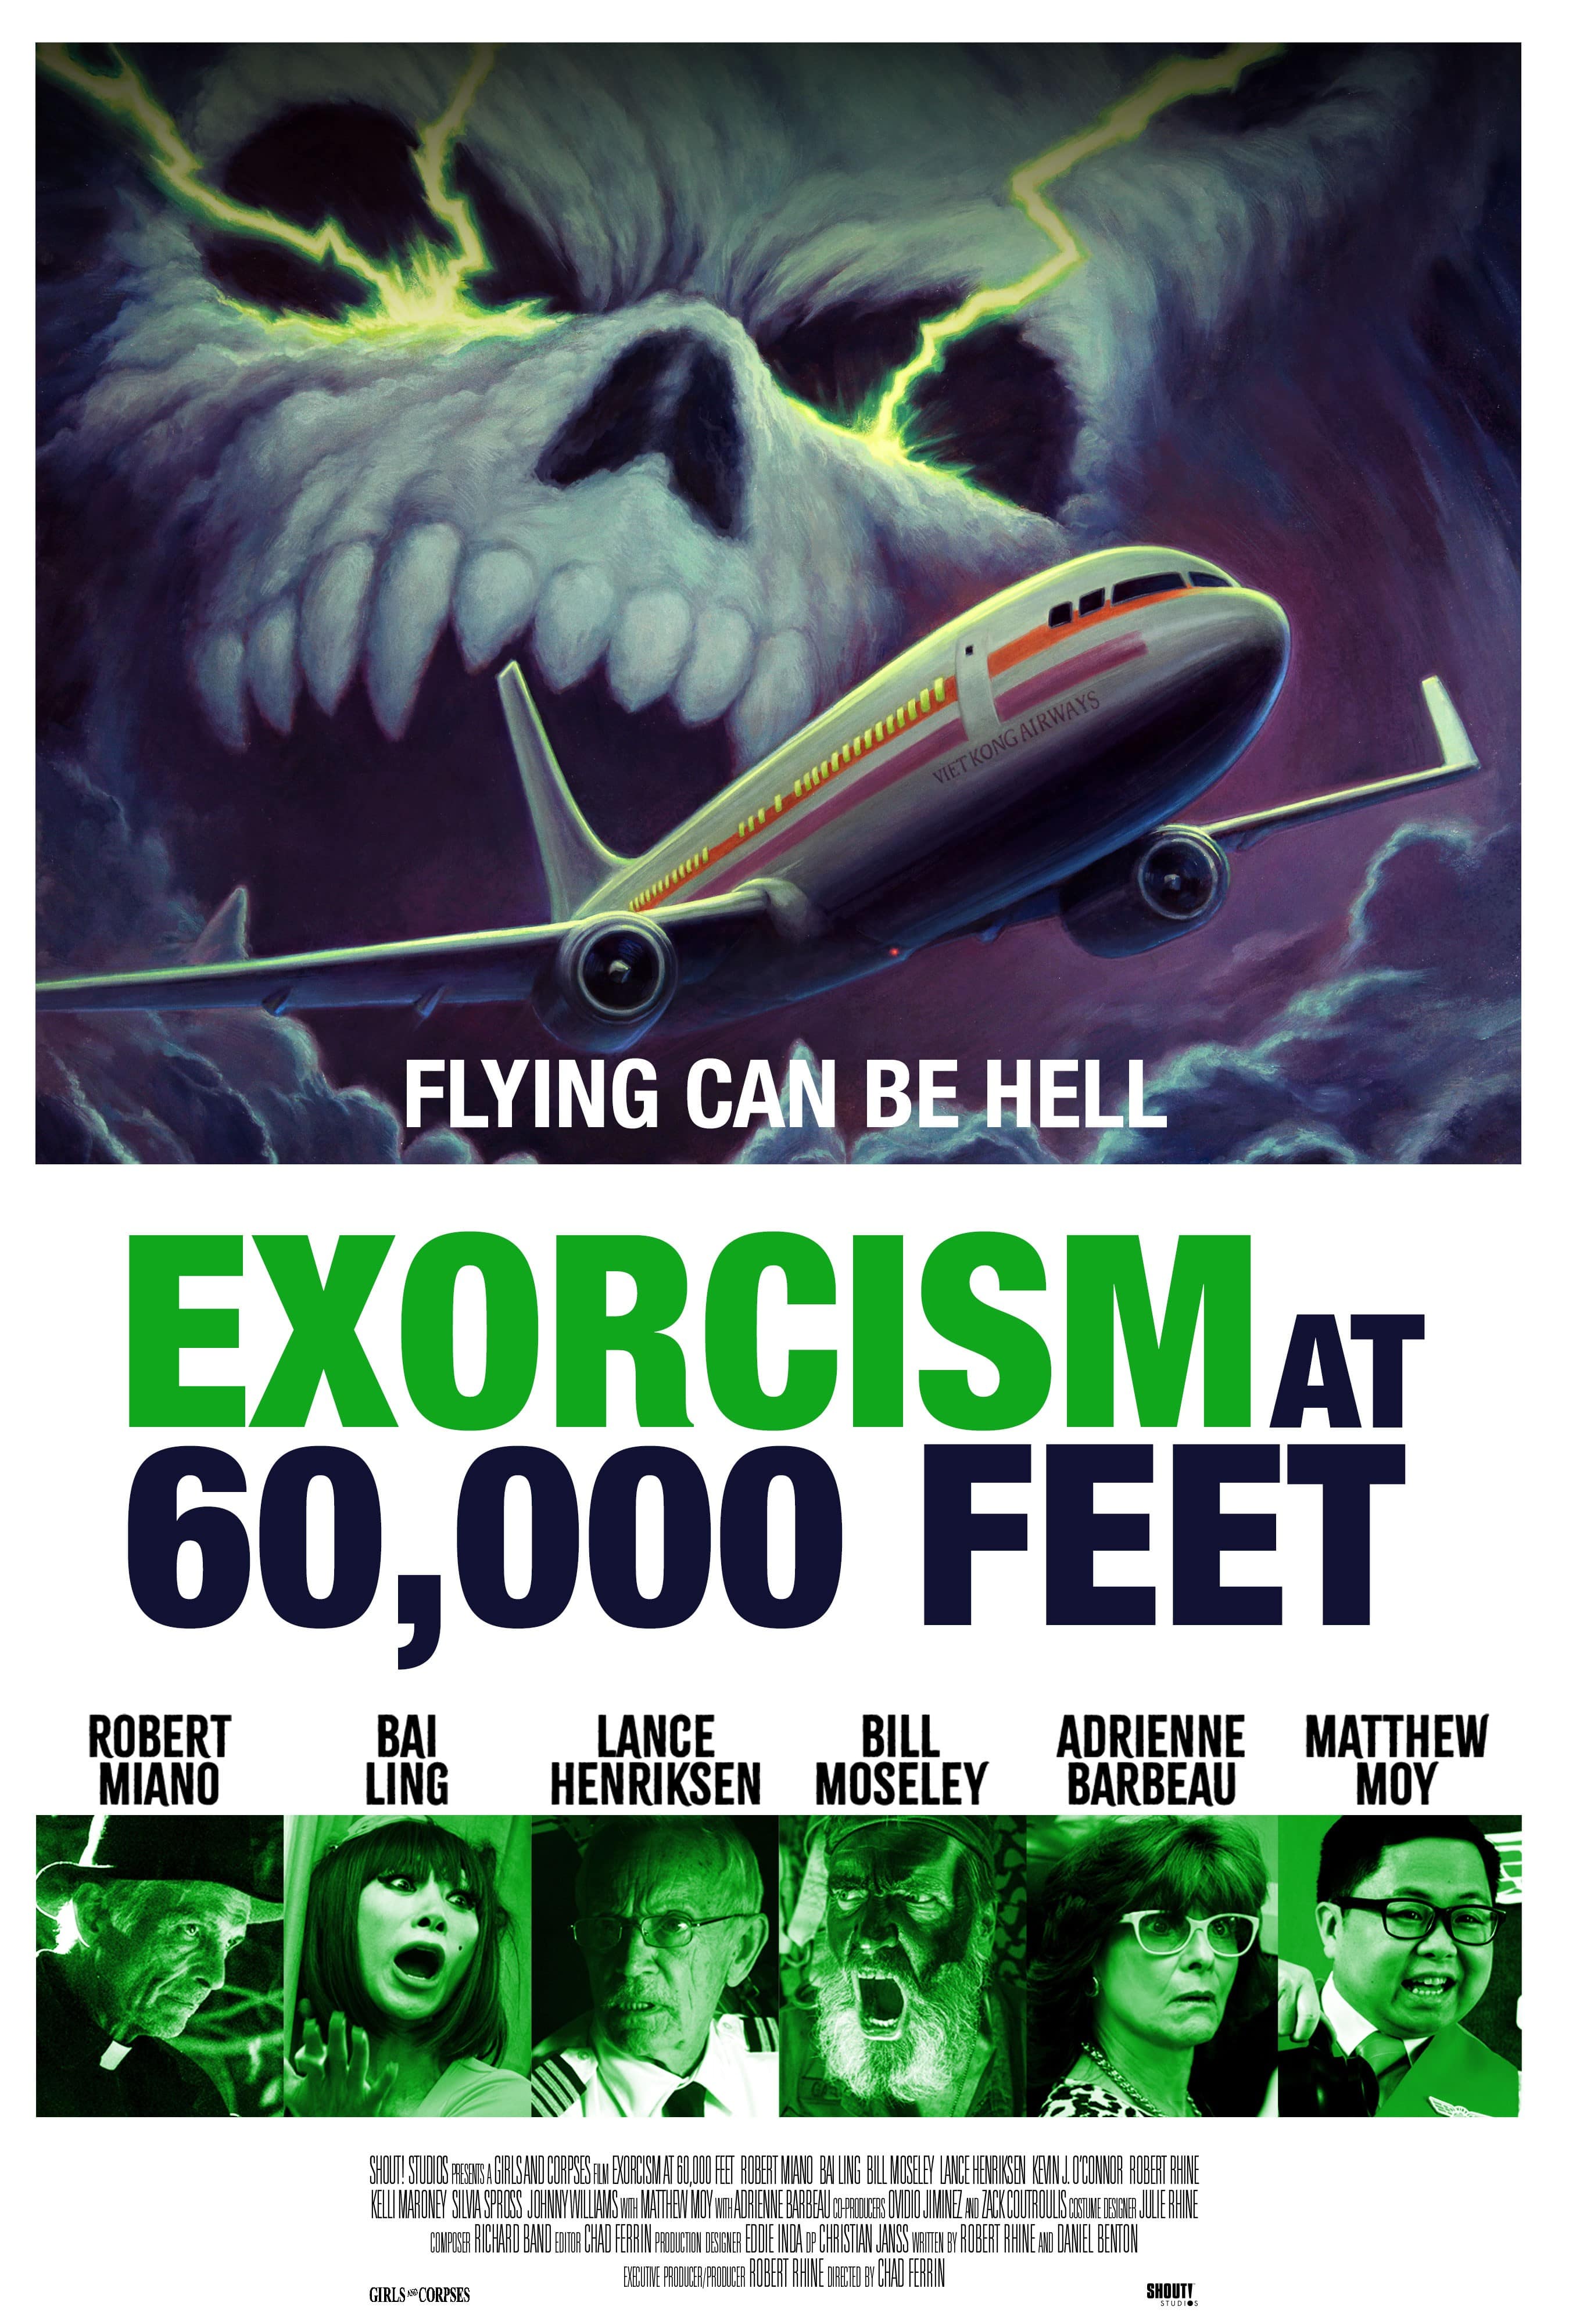 Exorcism at 60,000 Feet, Jeff Blumberg, Girls and Corpses